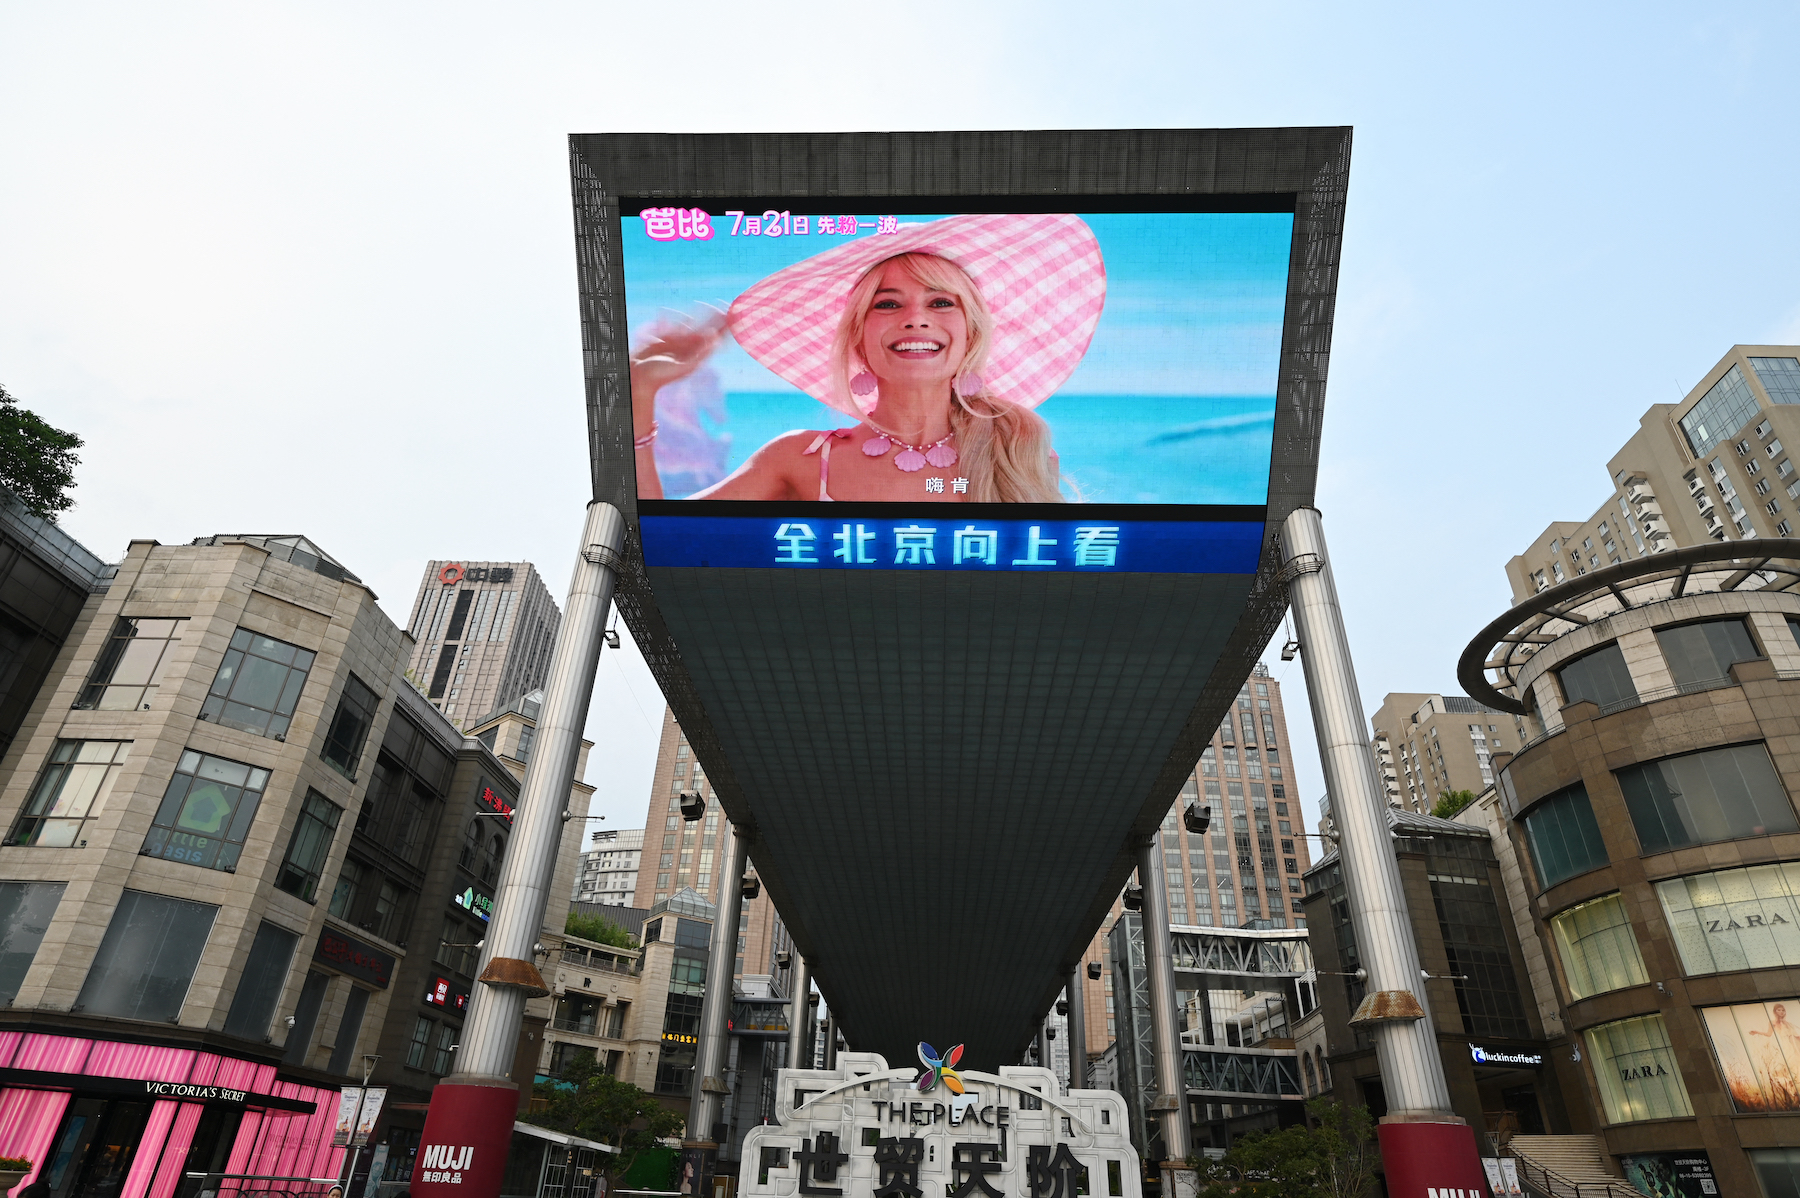 Giant screen outside shopping mall in China shares promotion video of "Barbie".